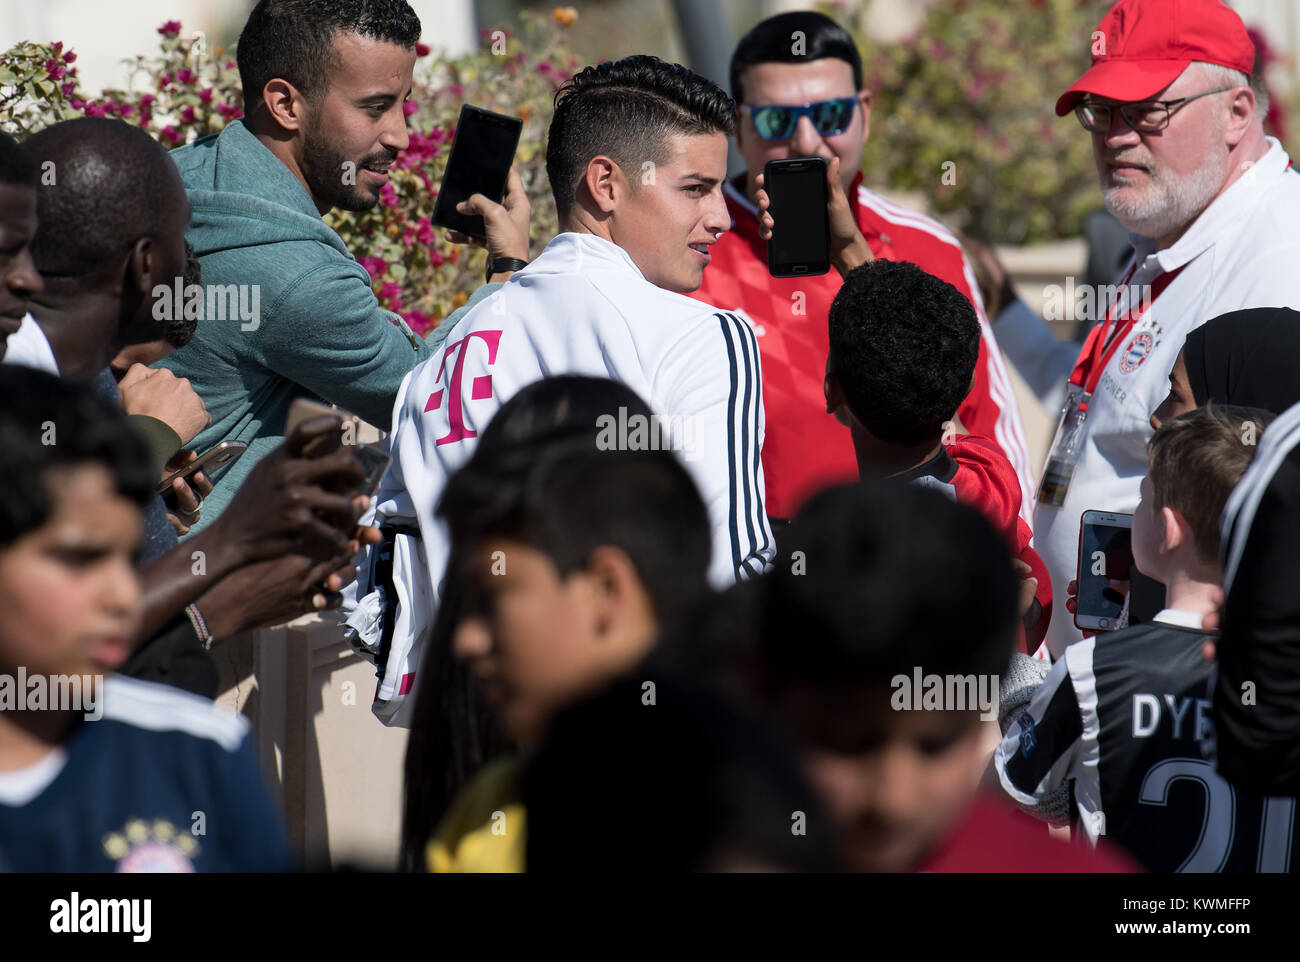 Doha, Qatar. 4th Jan, 2018. James Rodriguez of the Bundesliga team FC Bayern Munich takes photos with fans in Doha, Qatar, 4 January 2018. His team is preparing for the remaining season in a training camp in Qatar. Credit: Sven Hoppe/dpa/Alamy Live News Stock Photo